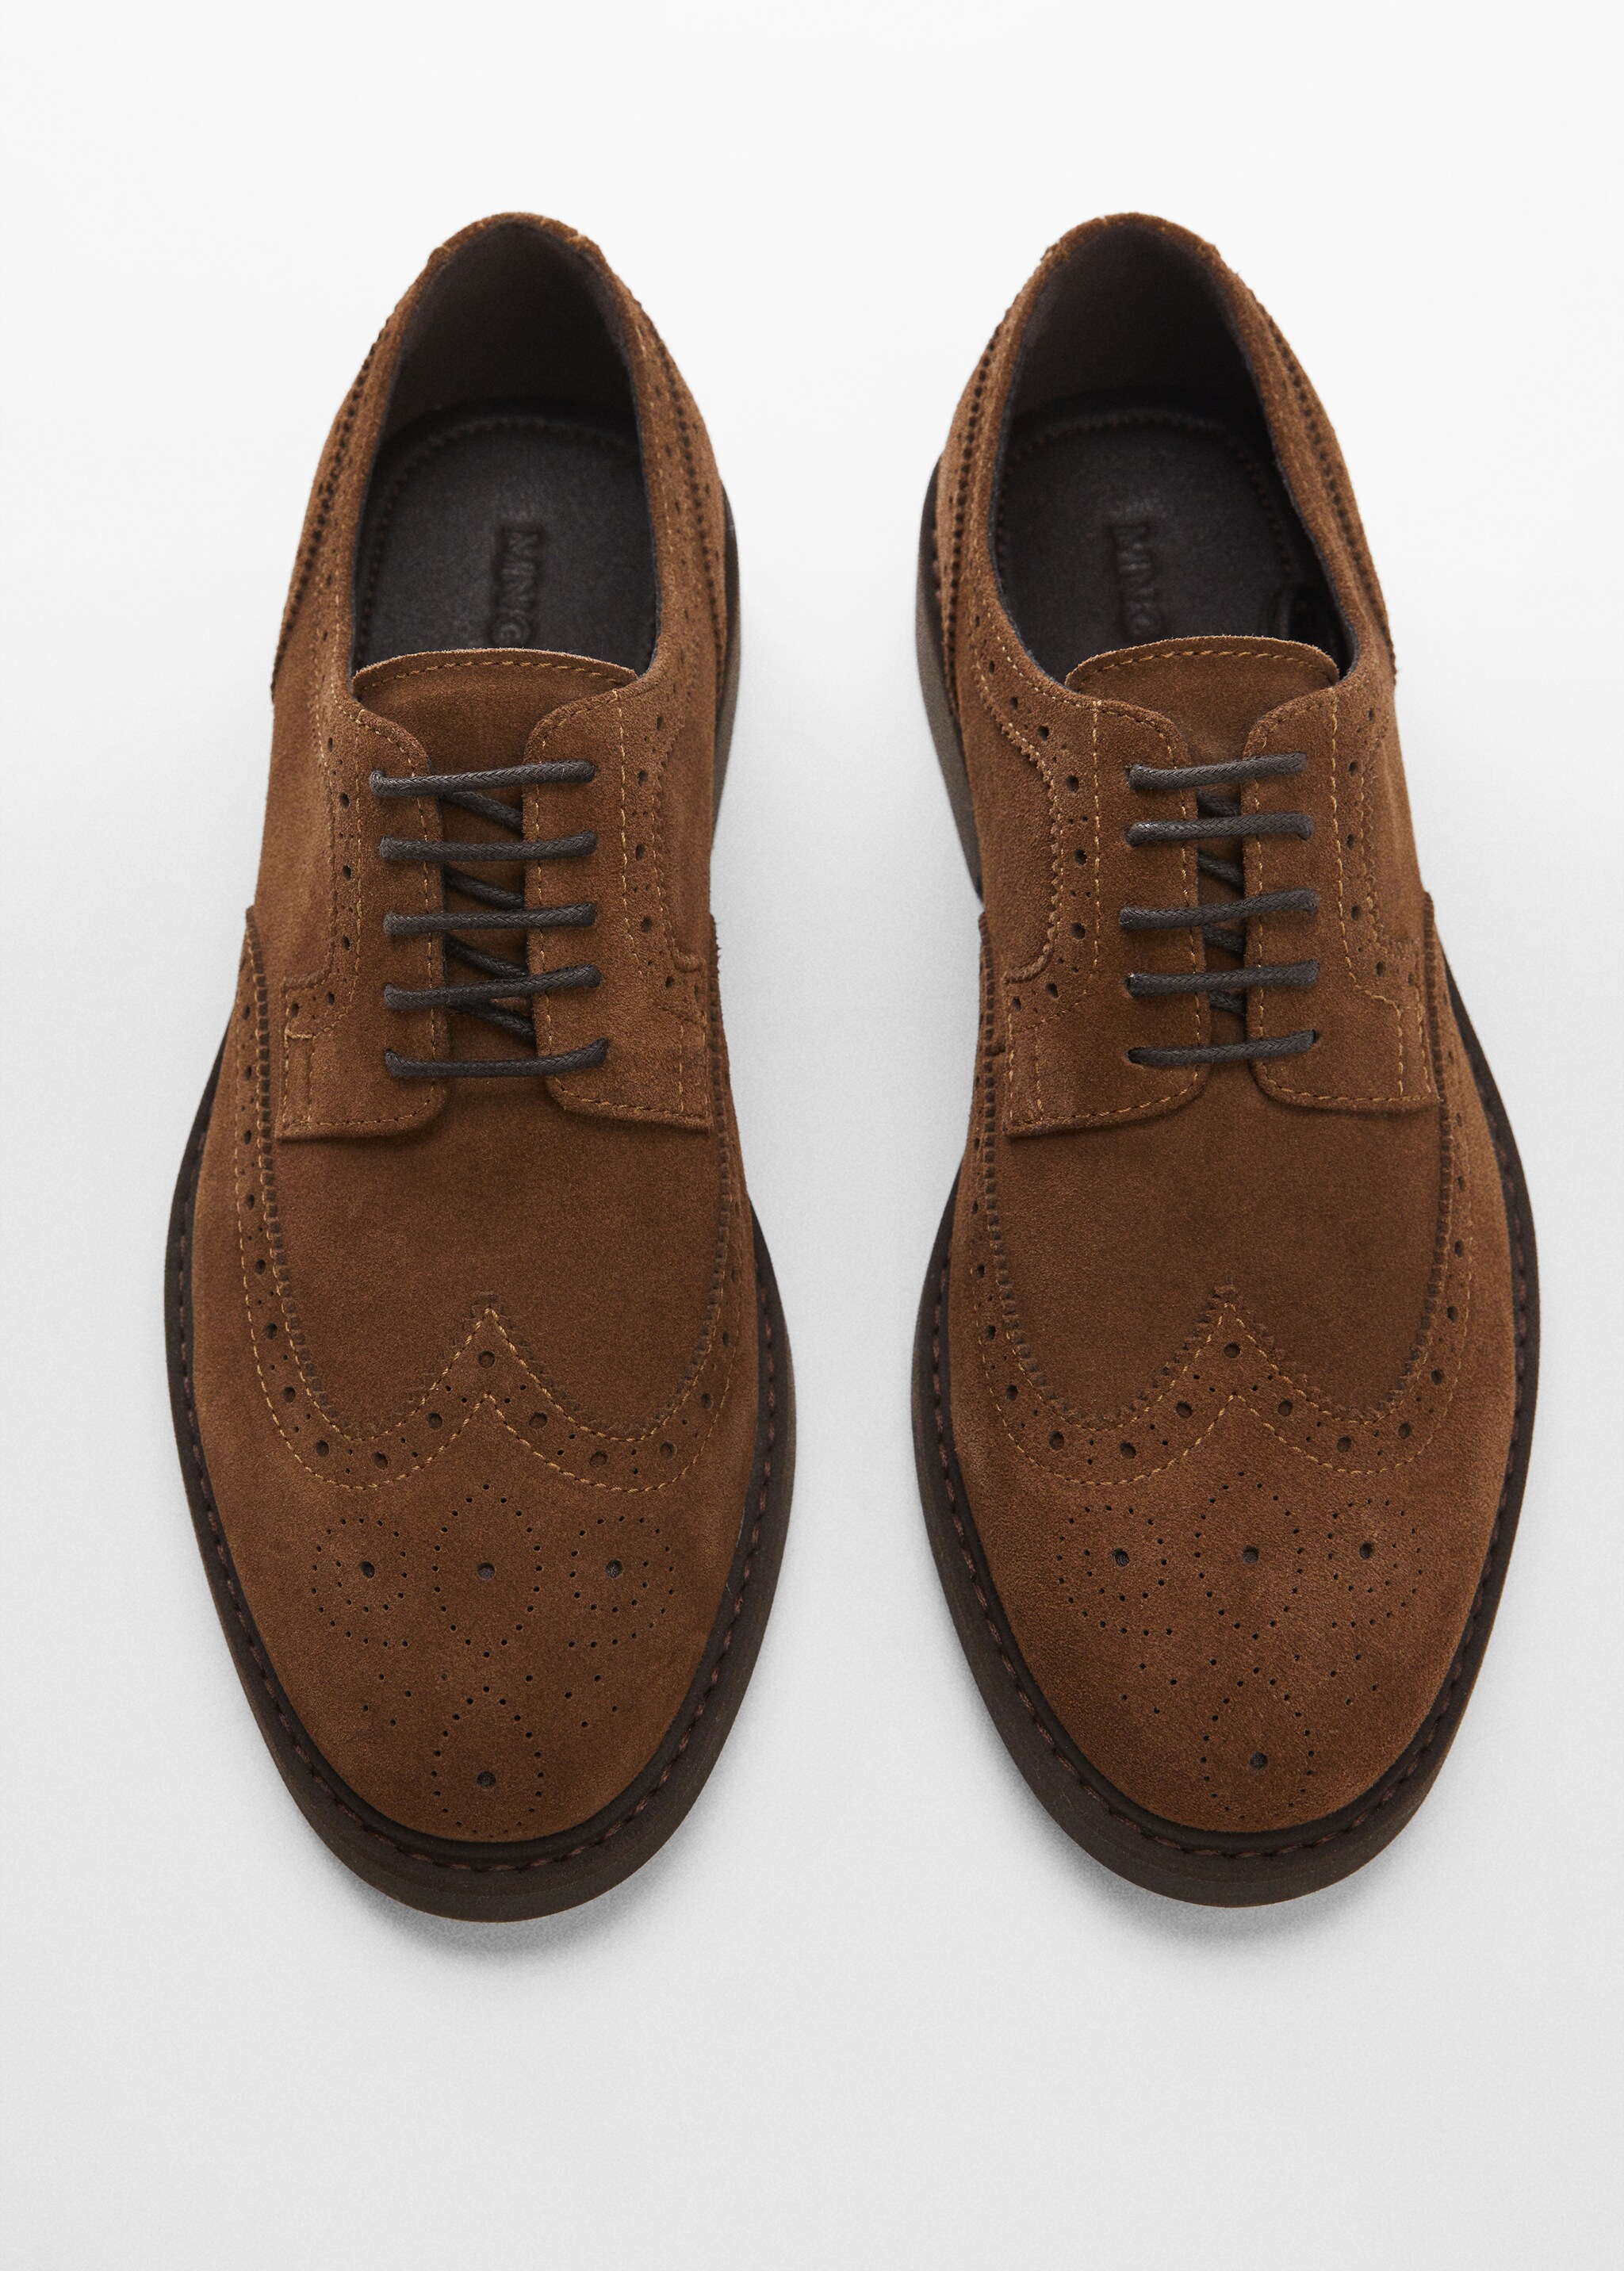 Die-cut suede blucher shoes - Details of the article 3